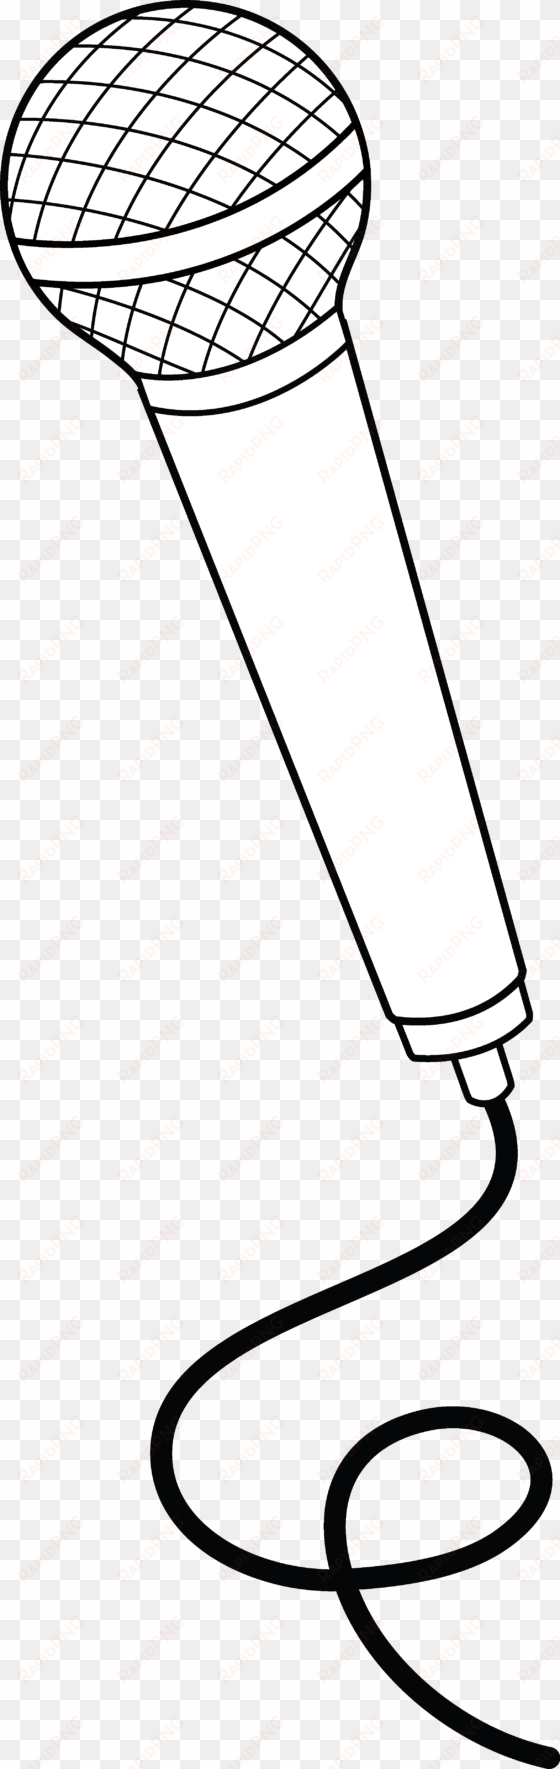 mic clipart png - microphone clipart black and white